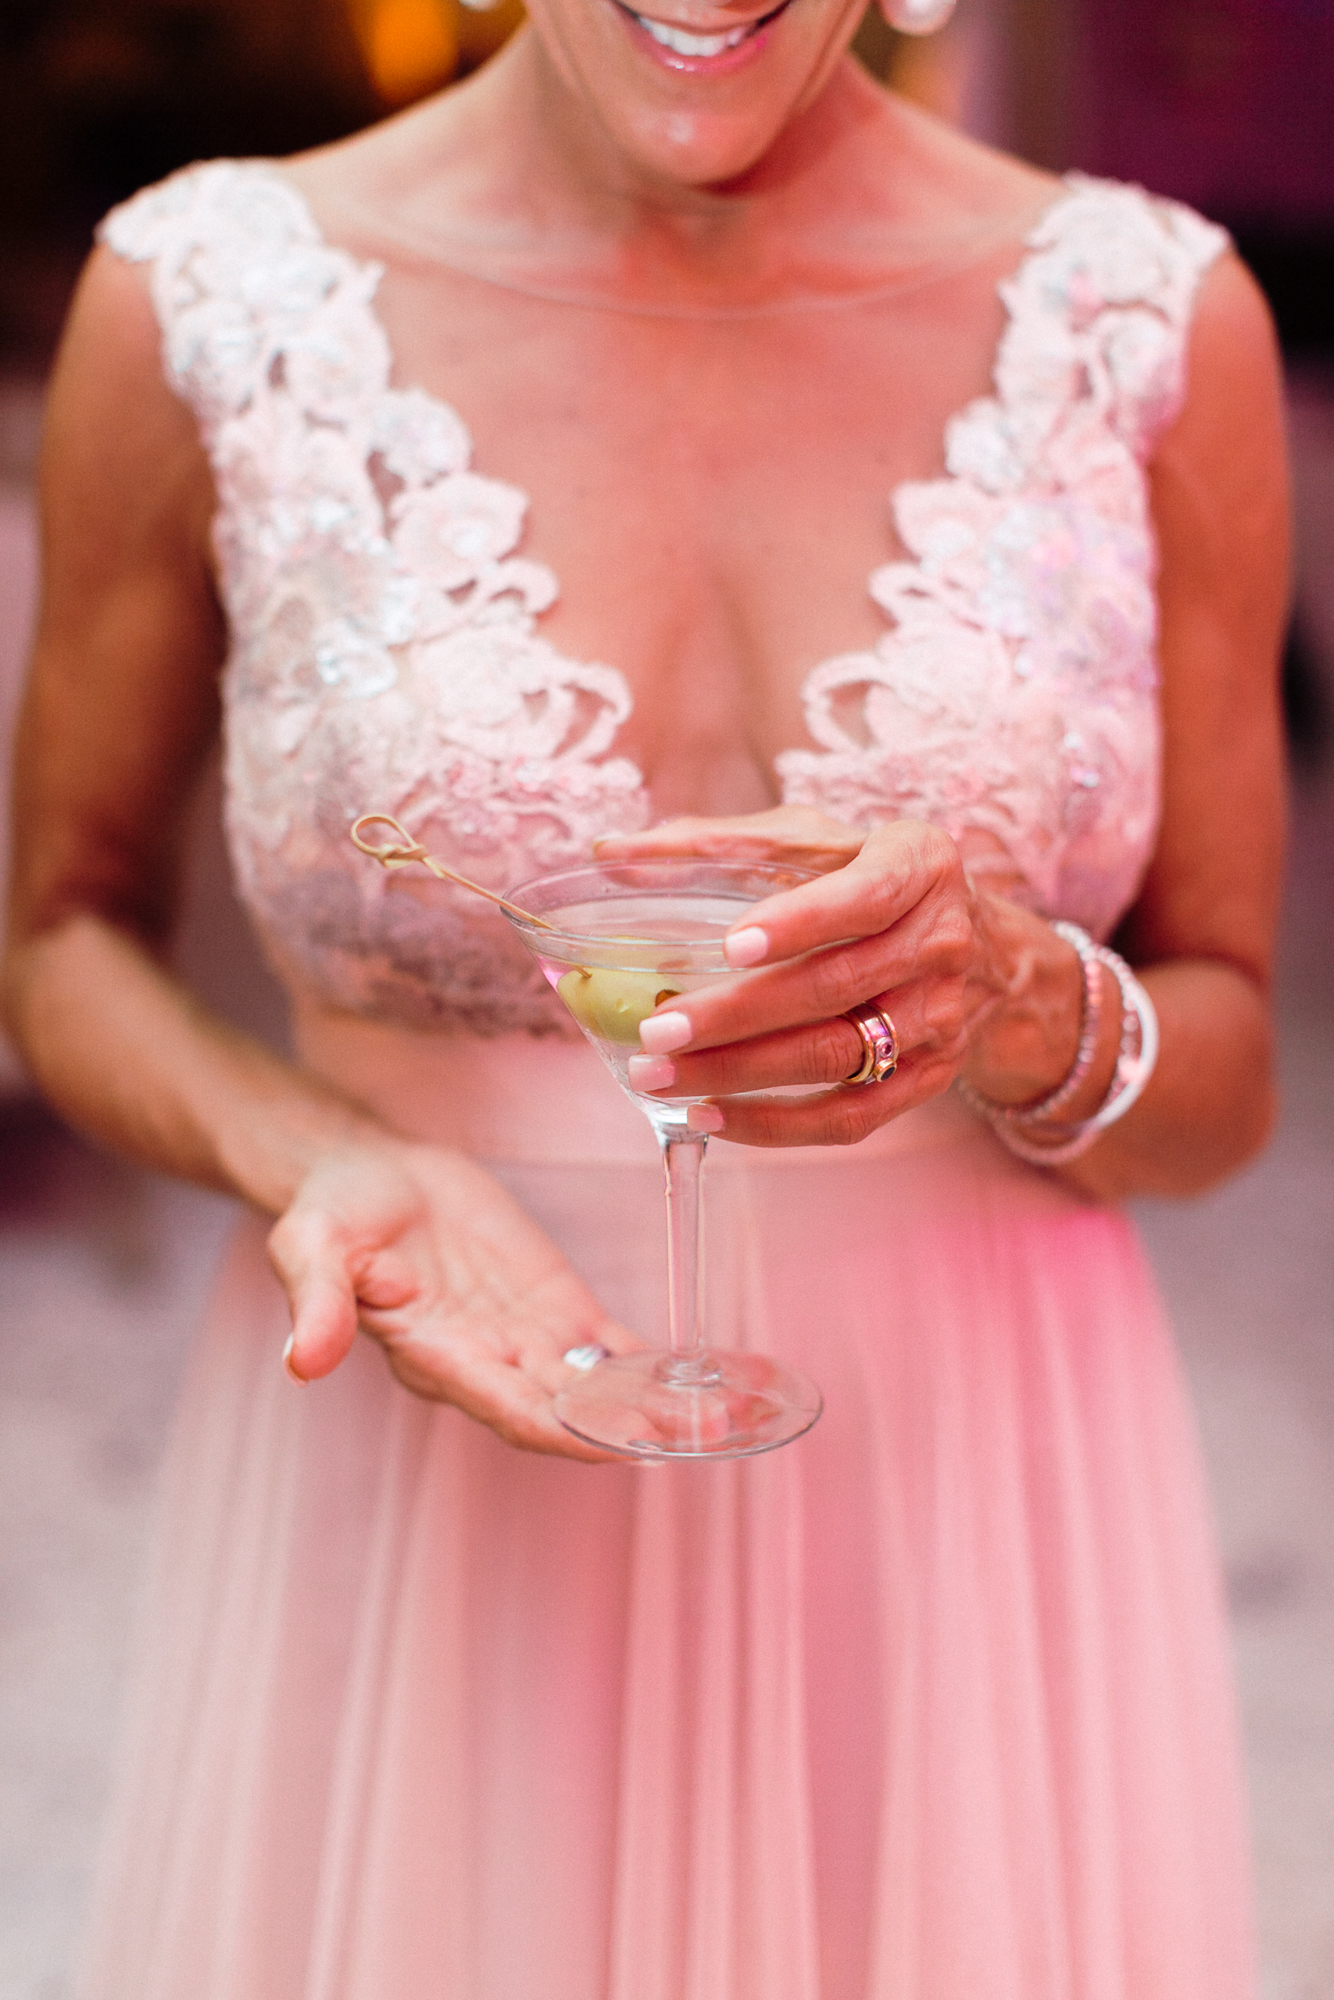 The maid of honor with her dirty martini from the martini bar